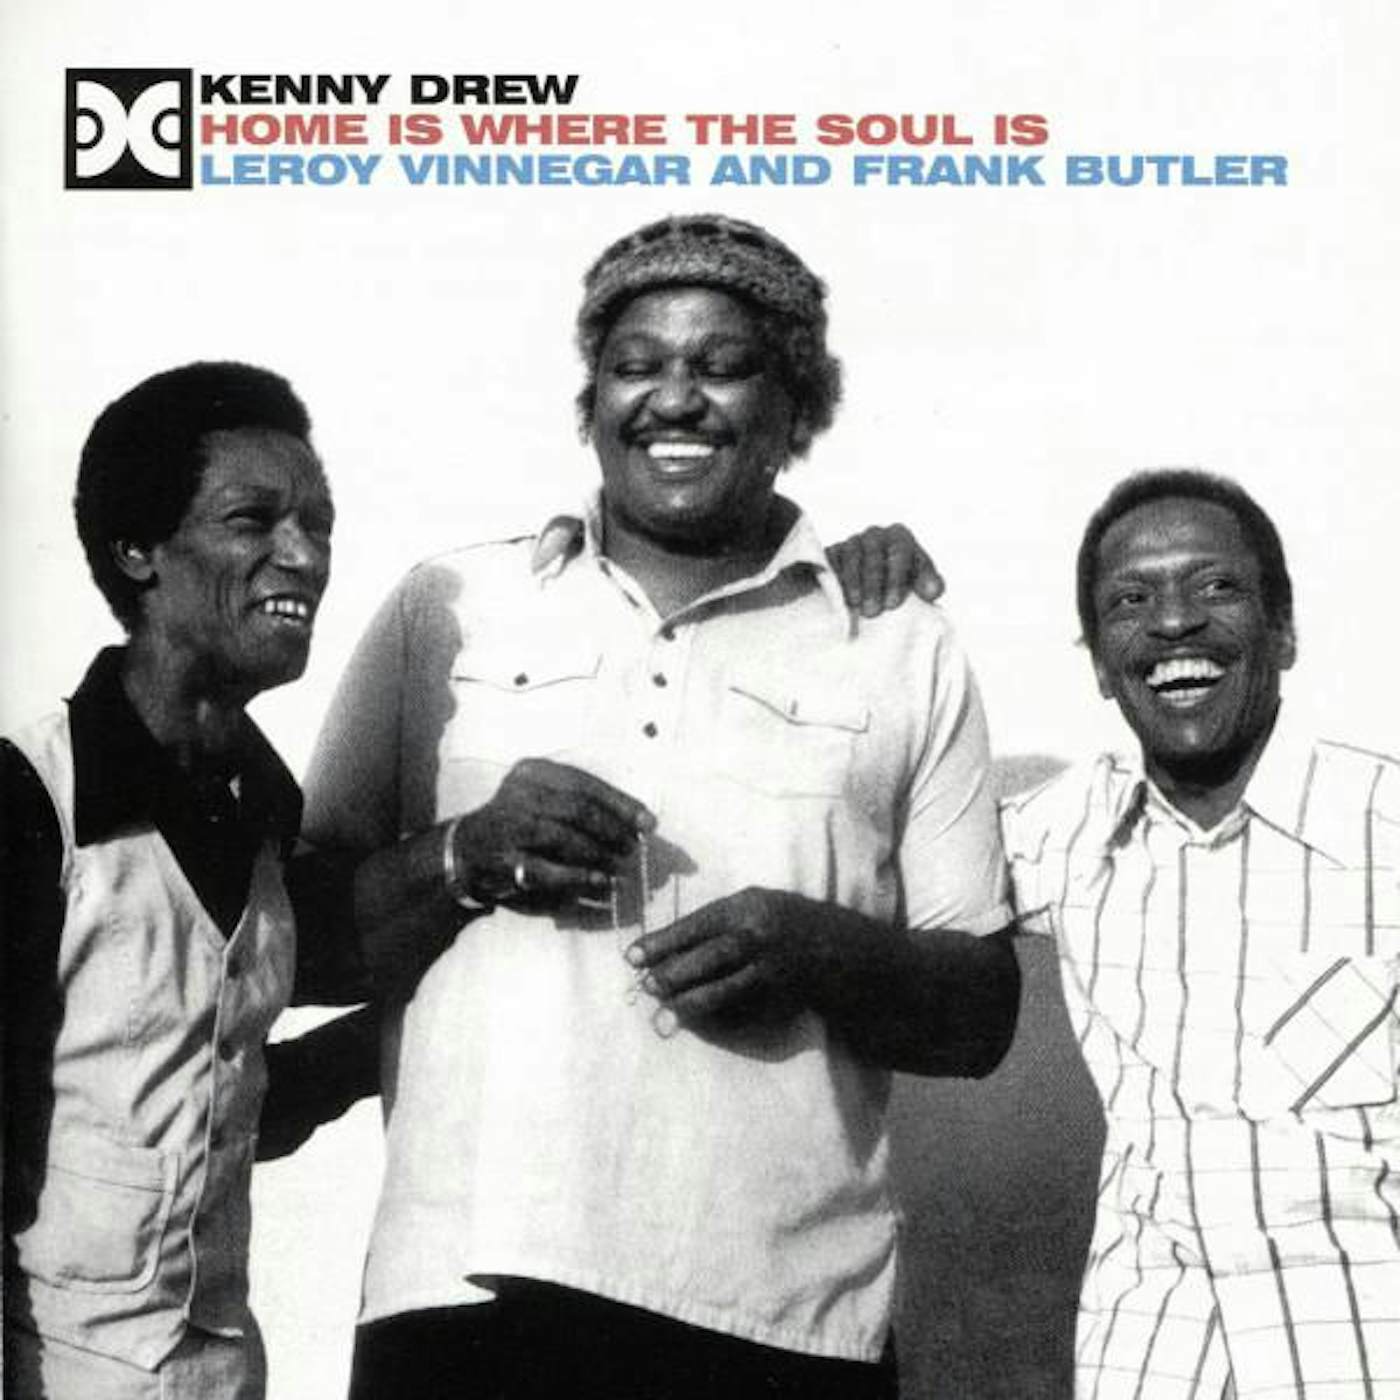 Kenny Drew HOME IS WHERE THE SOUL IS CD